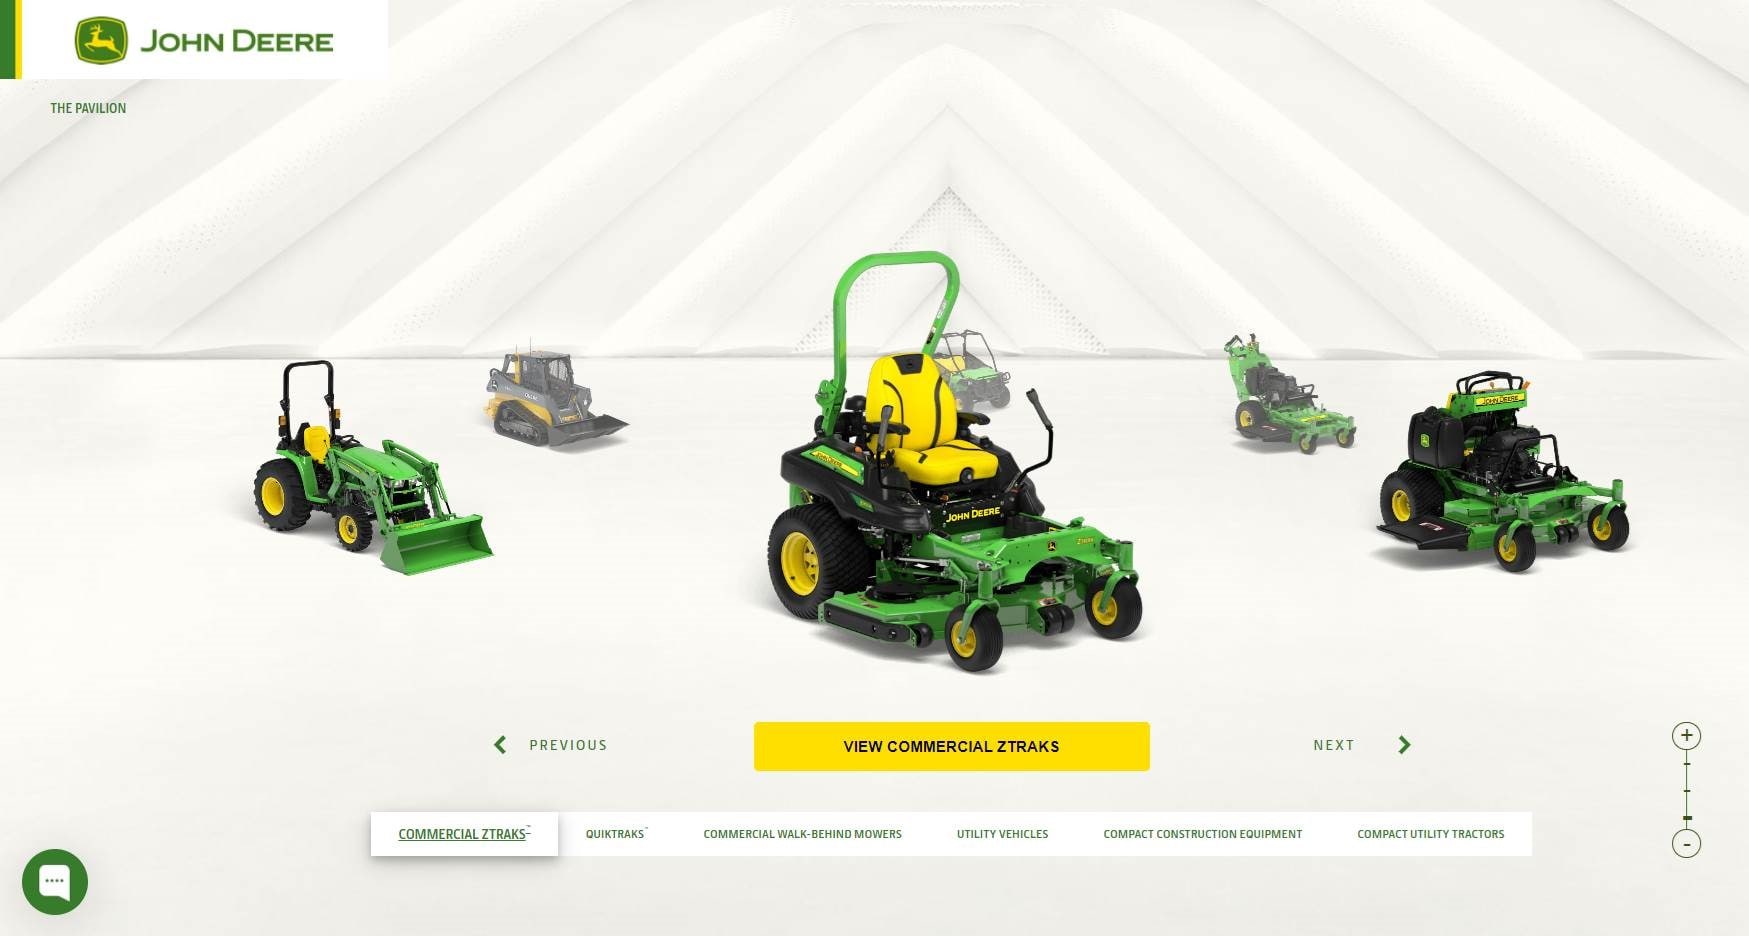 John Deere Virtual Pavilion for Professional Landscape Con<a href='http://product.global-ce.com/tractor/ 'target='_blank' style='color:blue;'>Tractor</a>s